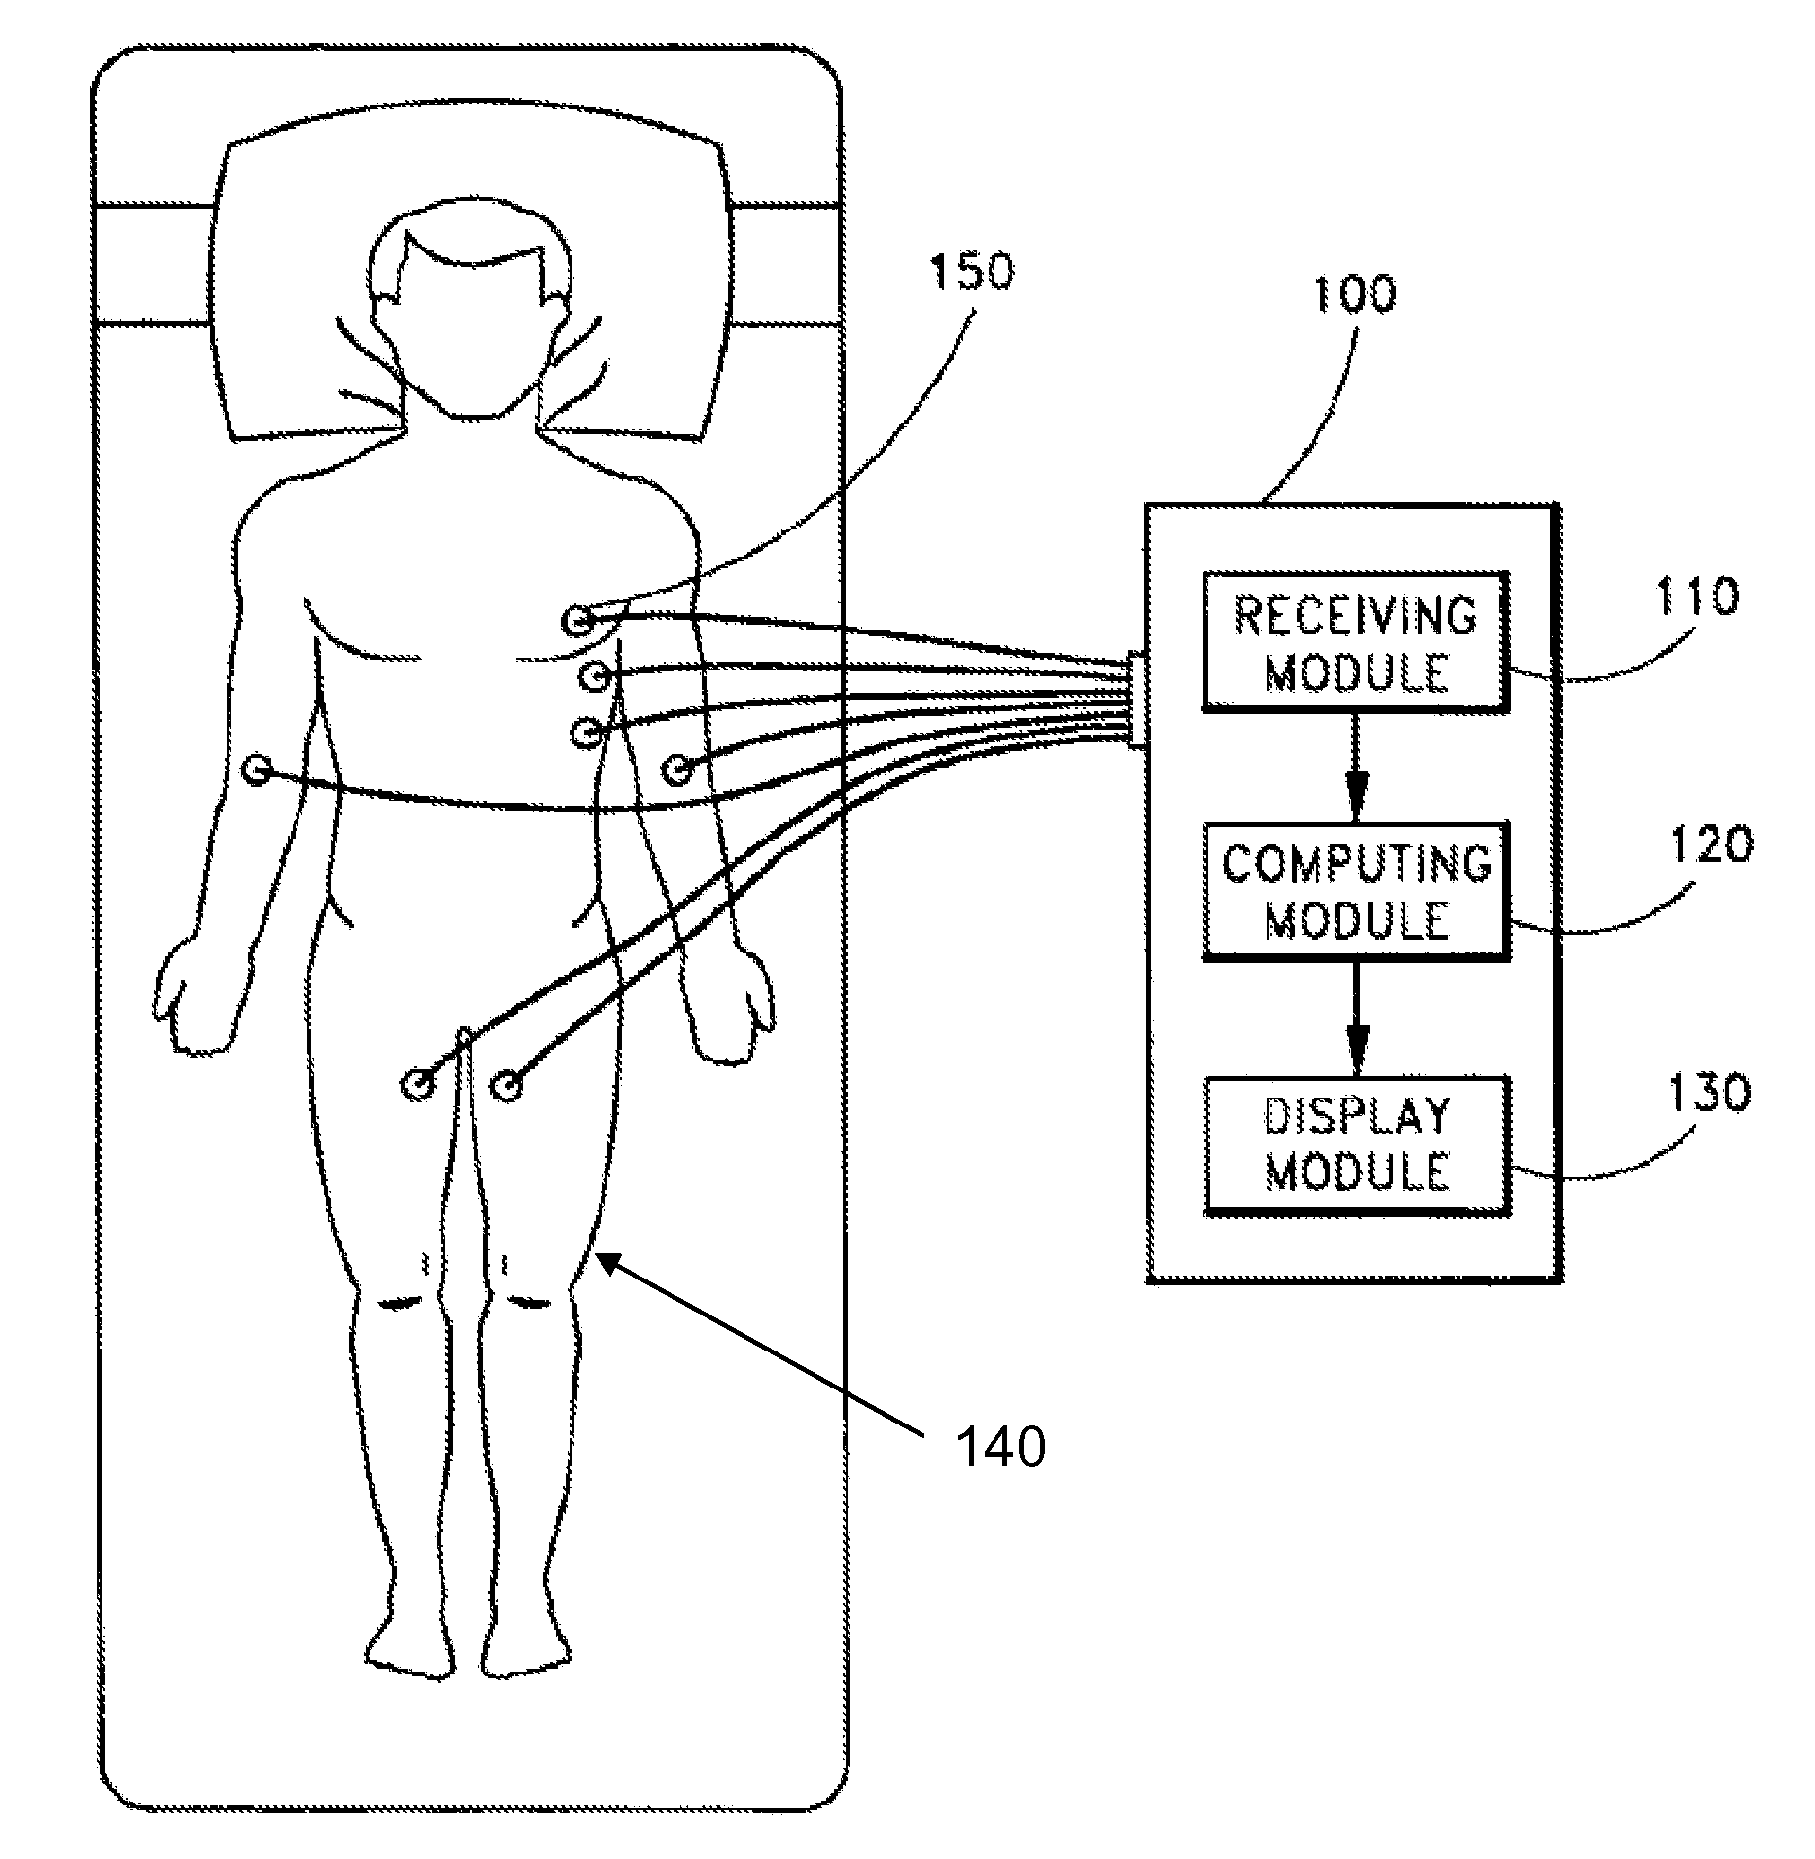 System and method for separating cardiac signals